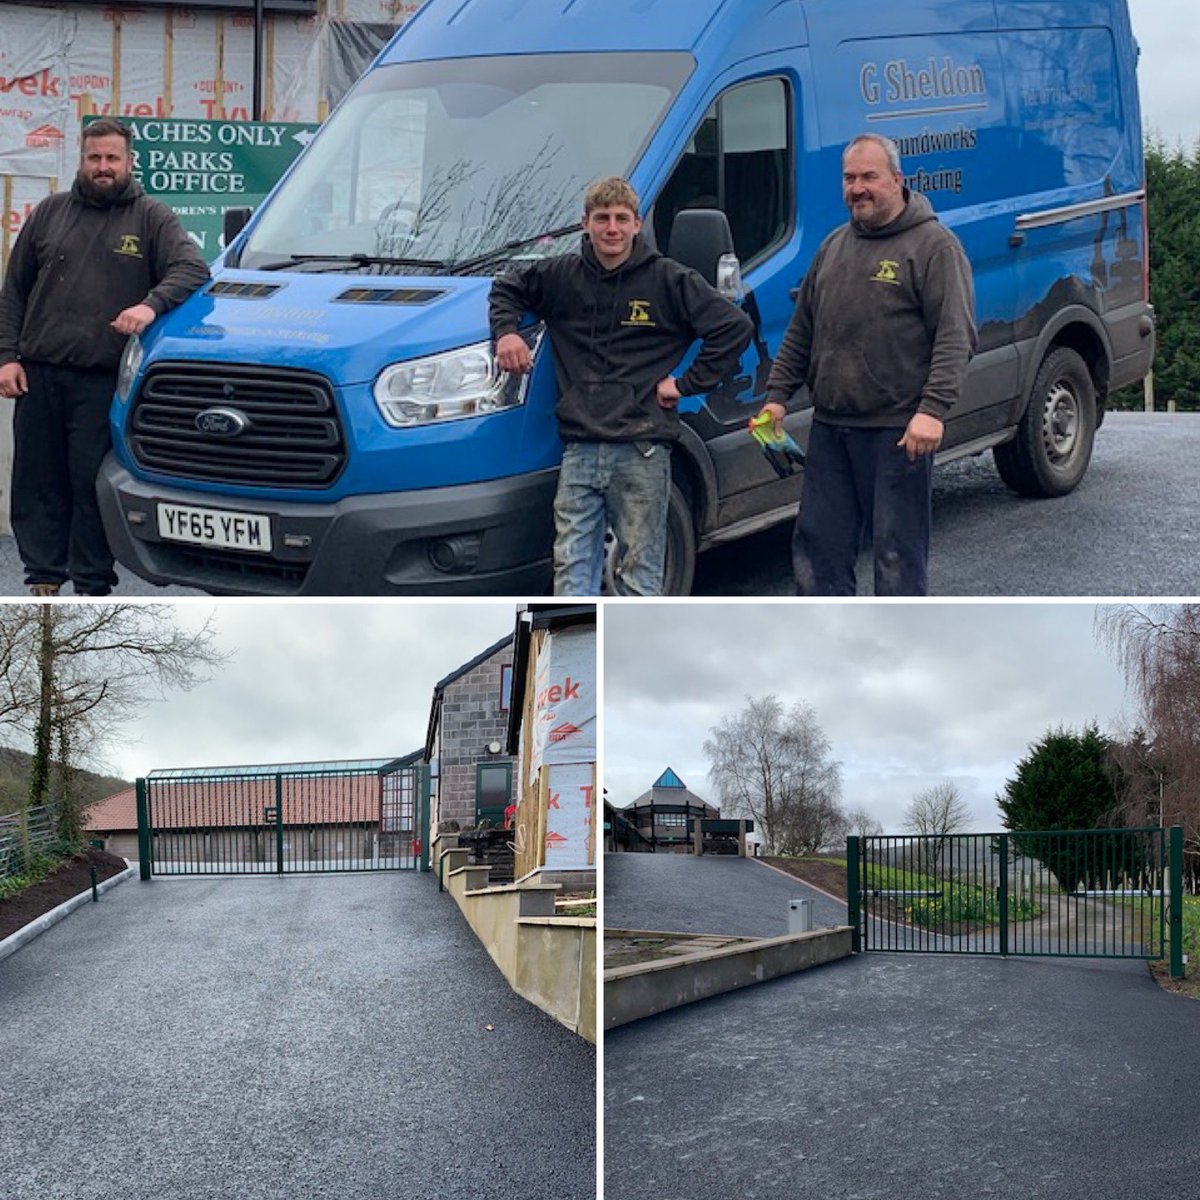 We would like to say a huge thank you for the great job G Sheldon groundwork’s and surfacing has done! 🙏🏼☺️ 
#childrenscharity #childrensoutdoorplay #childrensoutdooractivities #donationswelcome #donationsneeded #groundworks #tarmac